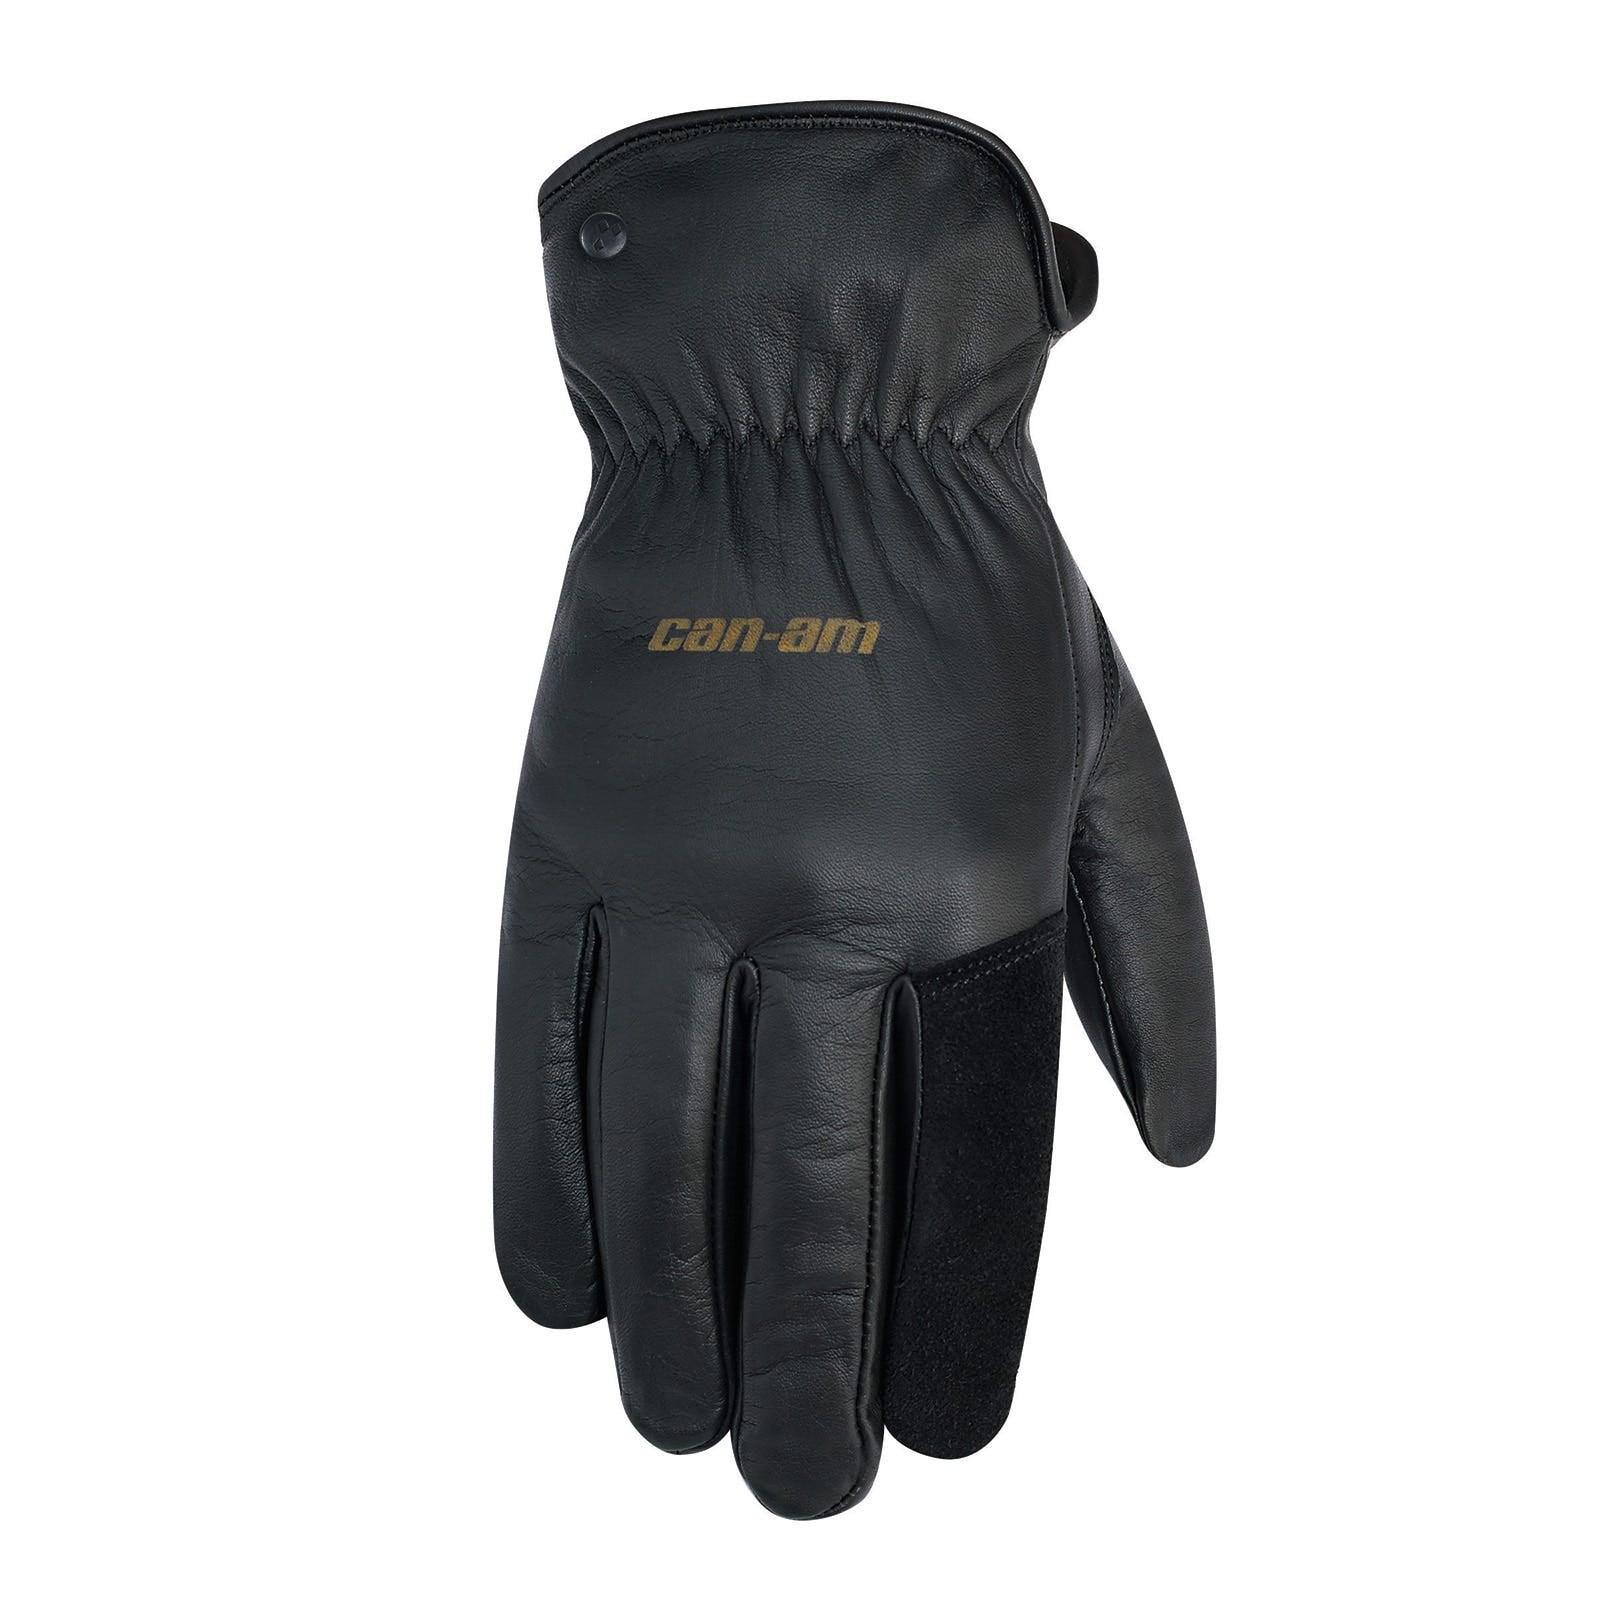 Can-am On road Blake Leather gloves 446290 - The Parts Lodge